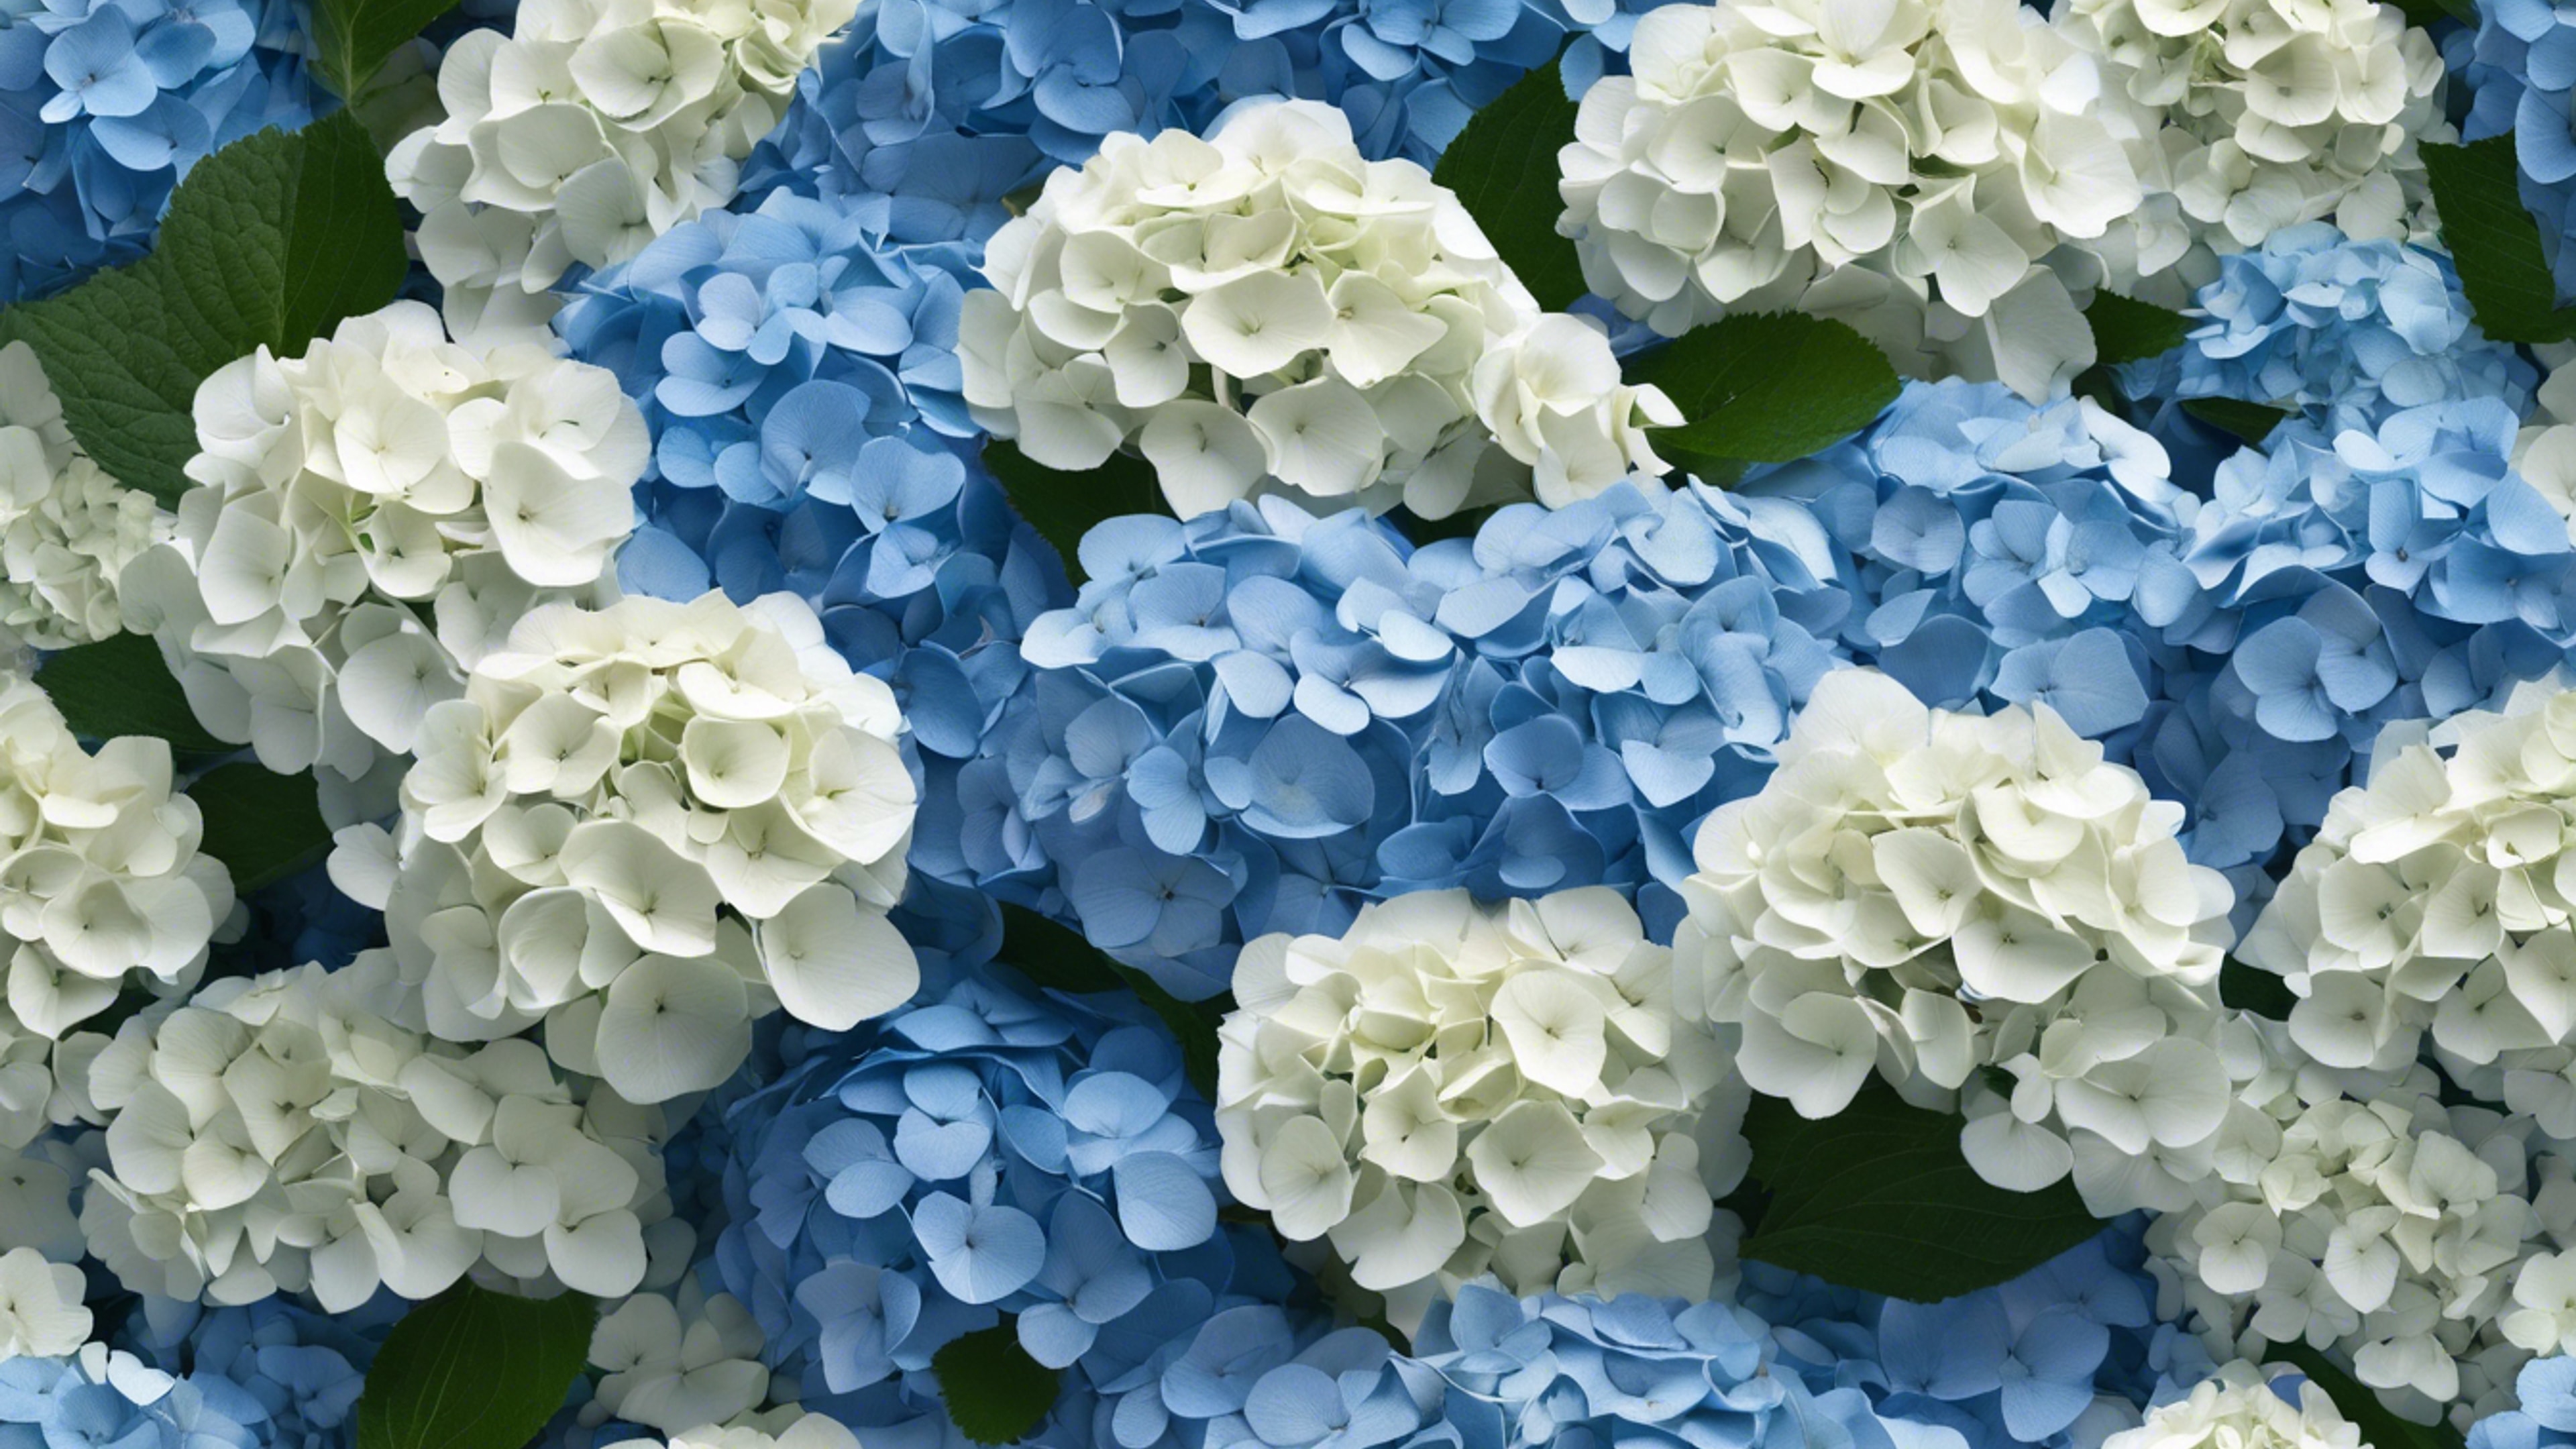 An array of hydrangea flowers in different stages of bloom, forming a gradient from white to deep blue. Tapeta[1ef5265e01794dabb6ef]